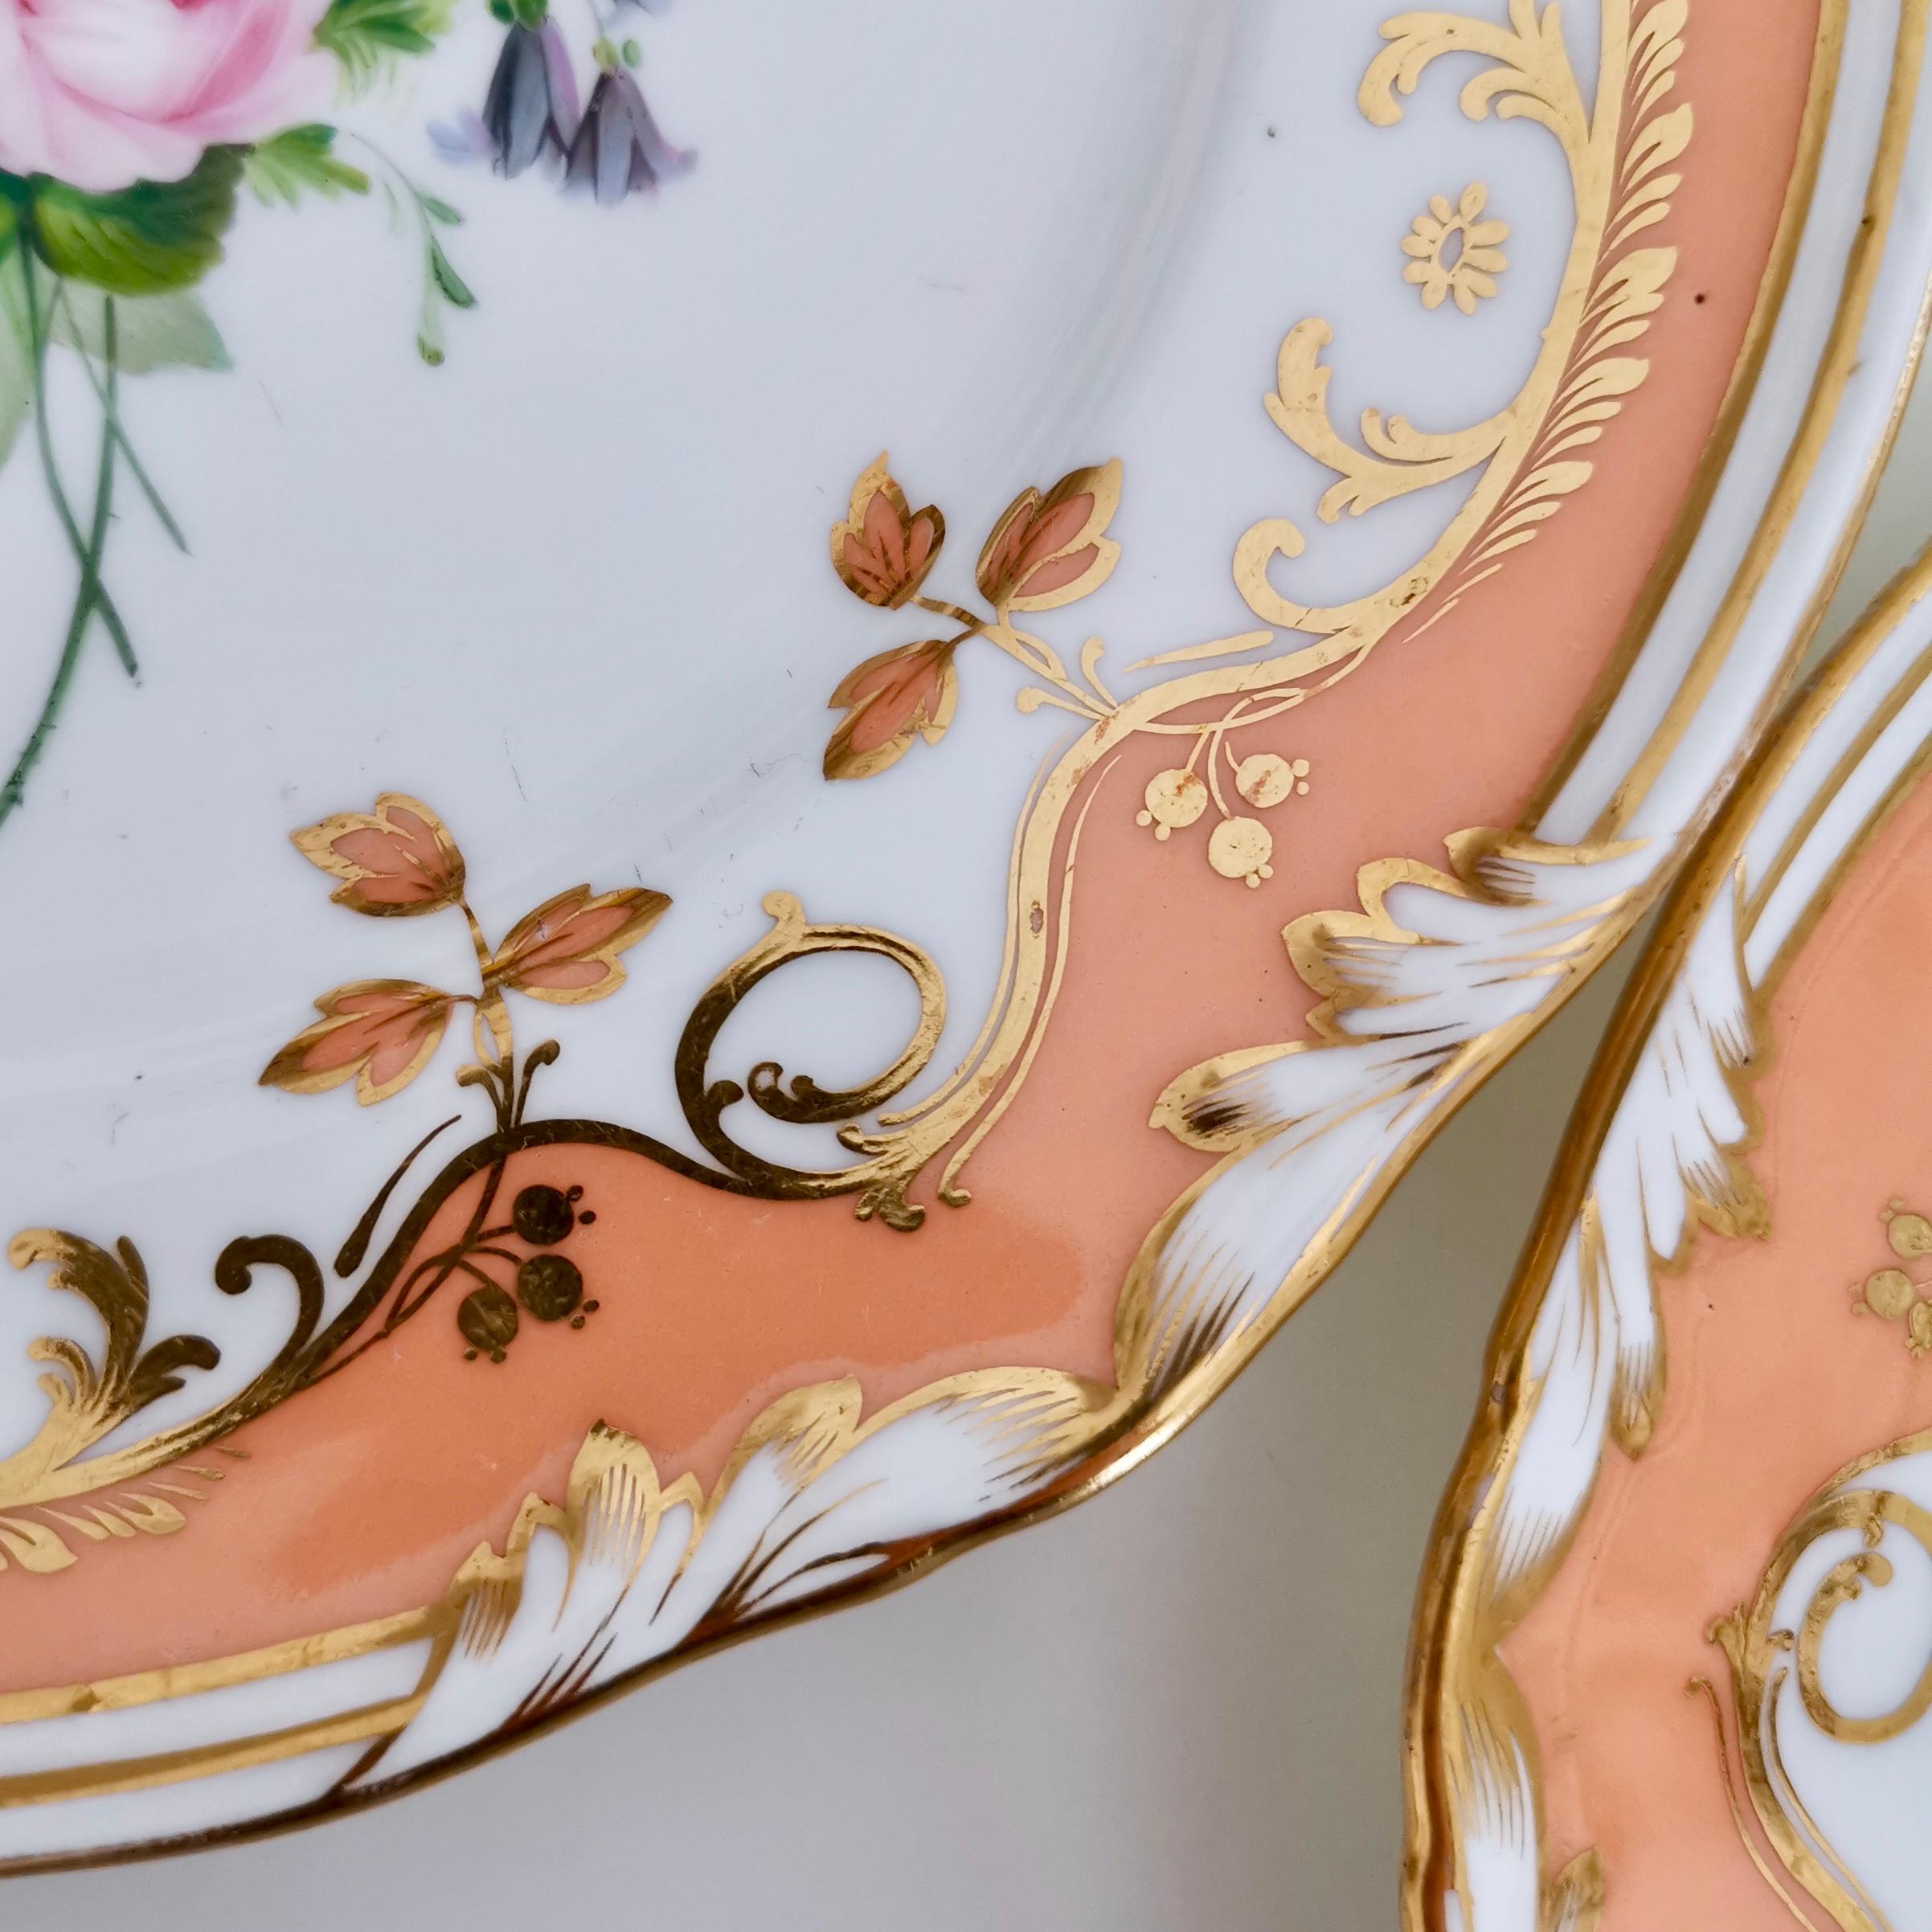 Hand-Painted Coalport Porcelain Plate, Peach Ground and Flowers by Thomas Dixon, '1'